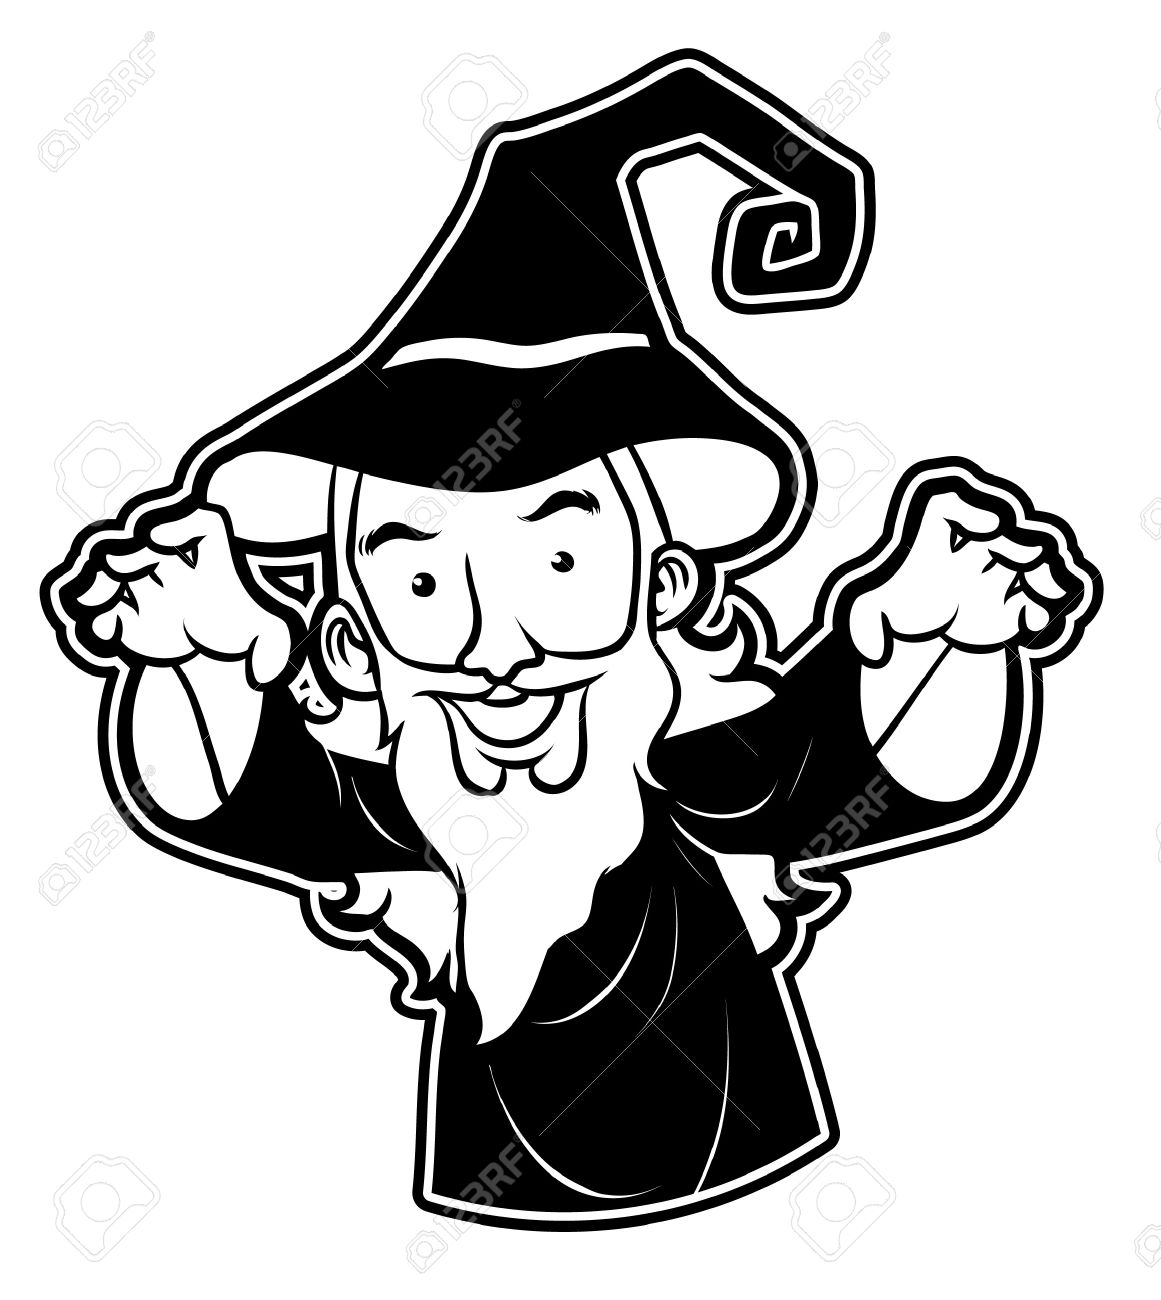 Black And White Clipart Wizard Royalty Free Cliparts, Vectors, And.